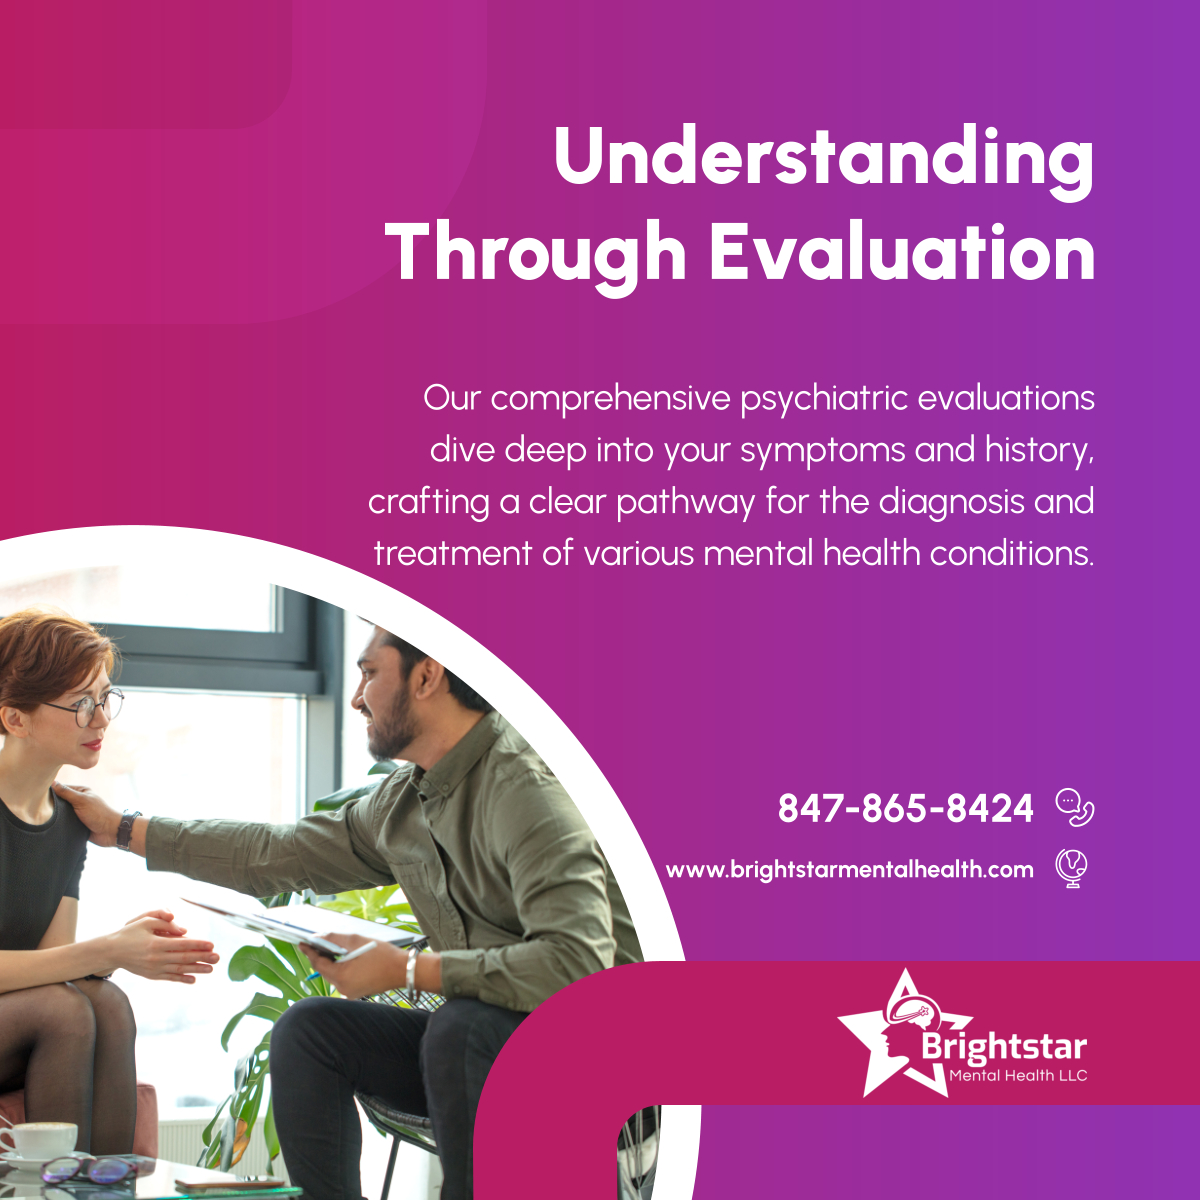 Take the first step towards clarity and recovery. Our detailed assessments are the foundation of personalized treatment plans. 

#ChicagoTherapy #IllinoisTherapist #BehavioralHealthCare #PsychiatricEvaluation